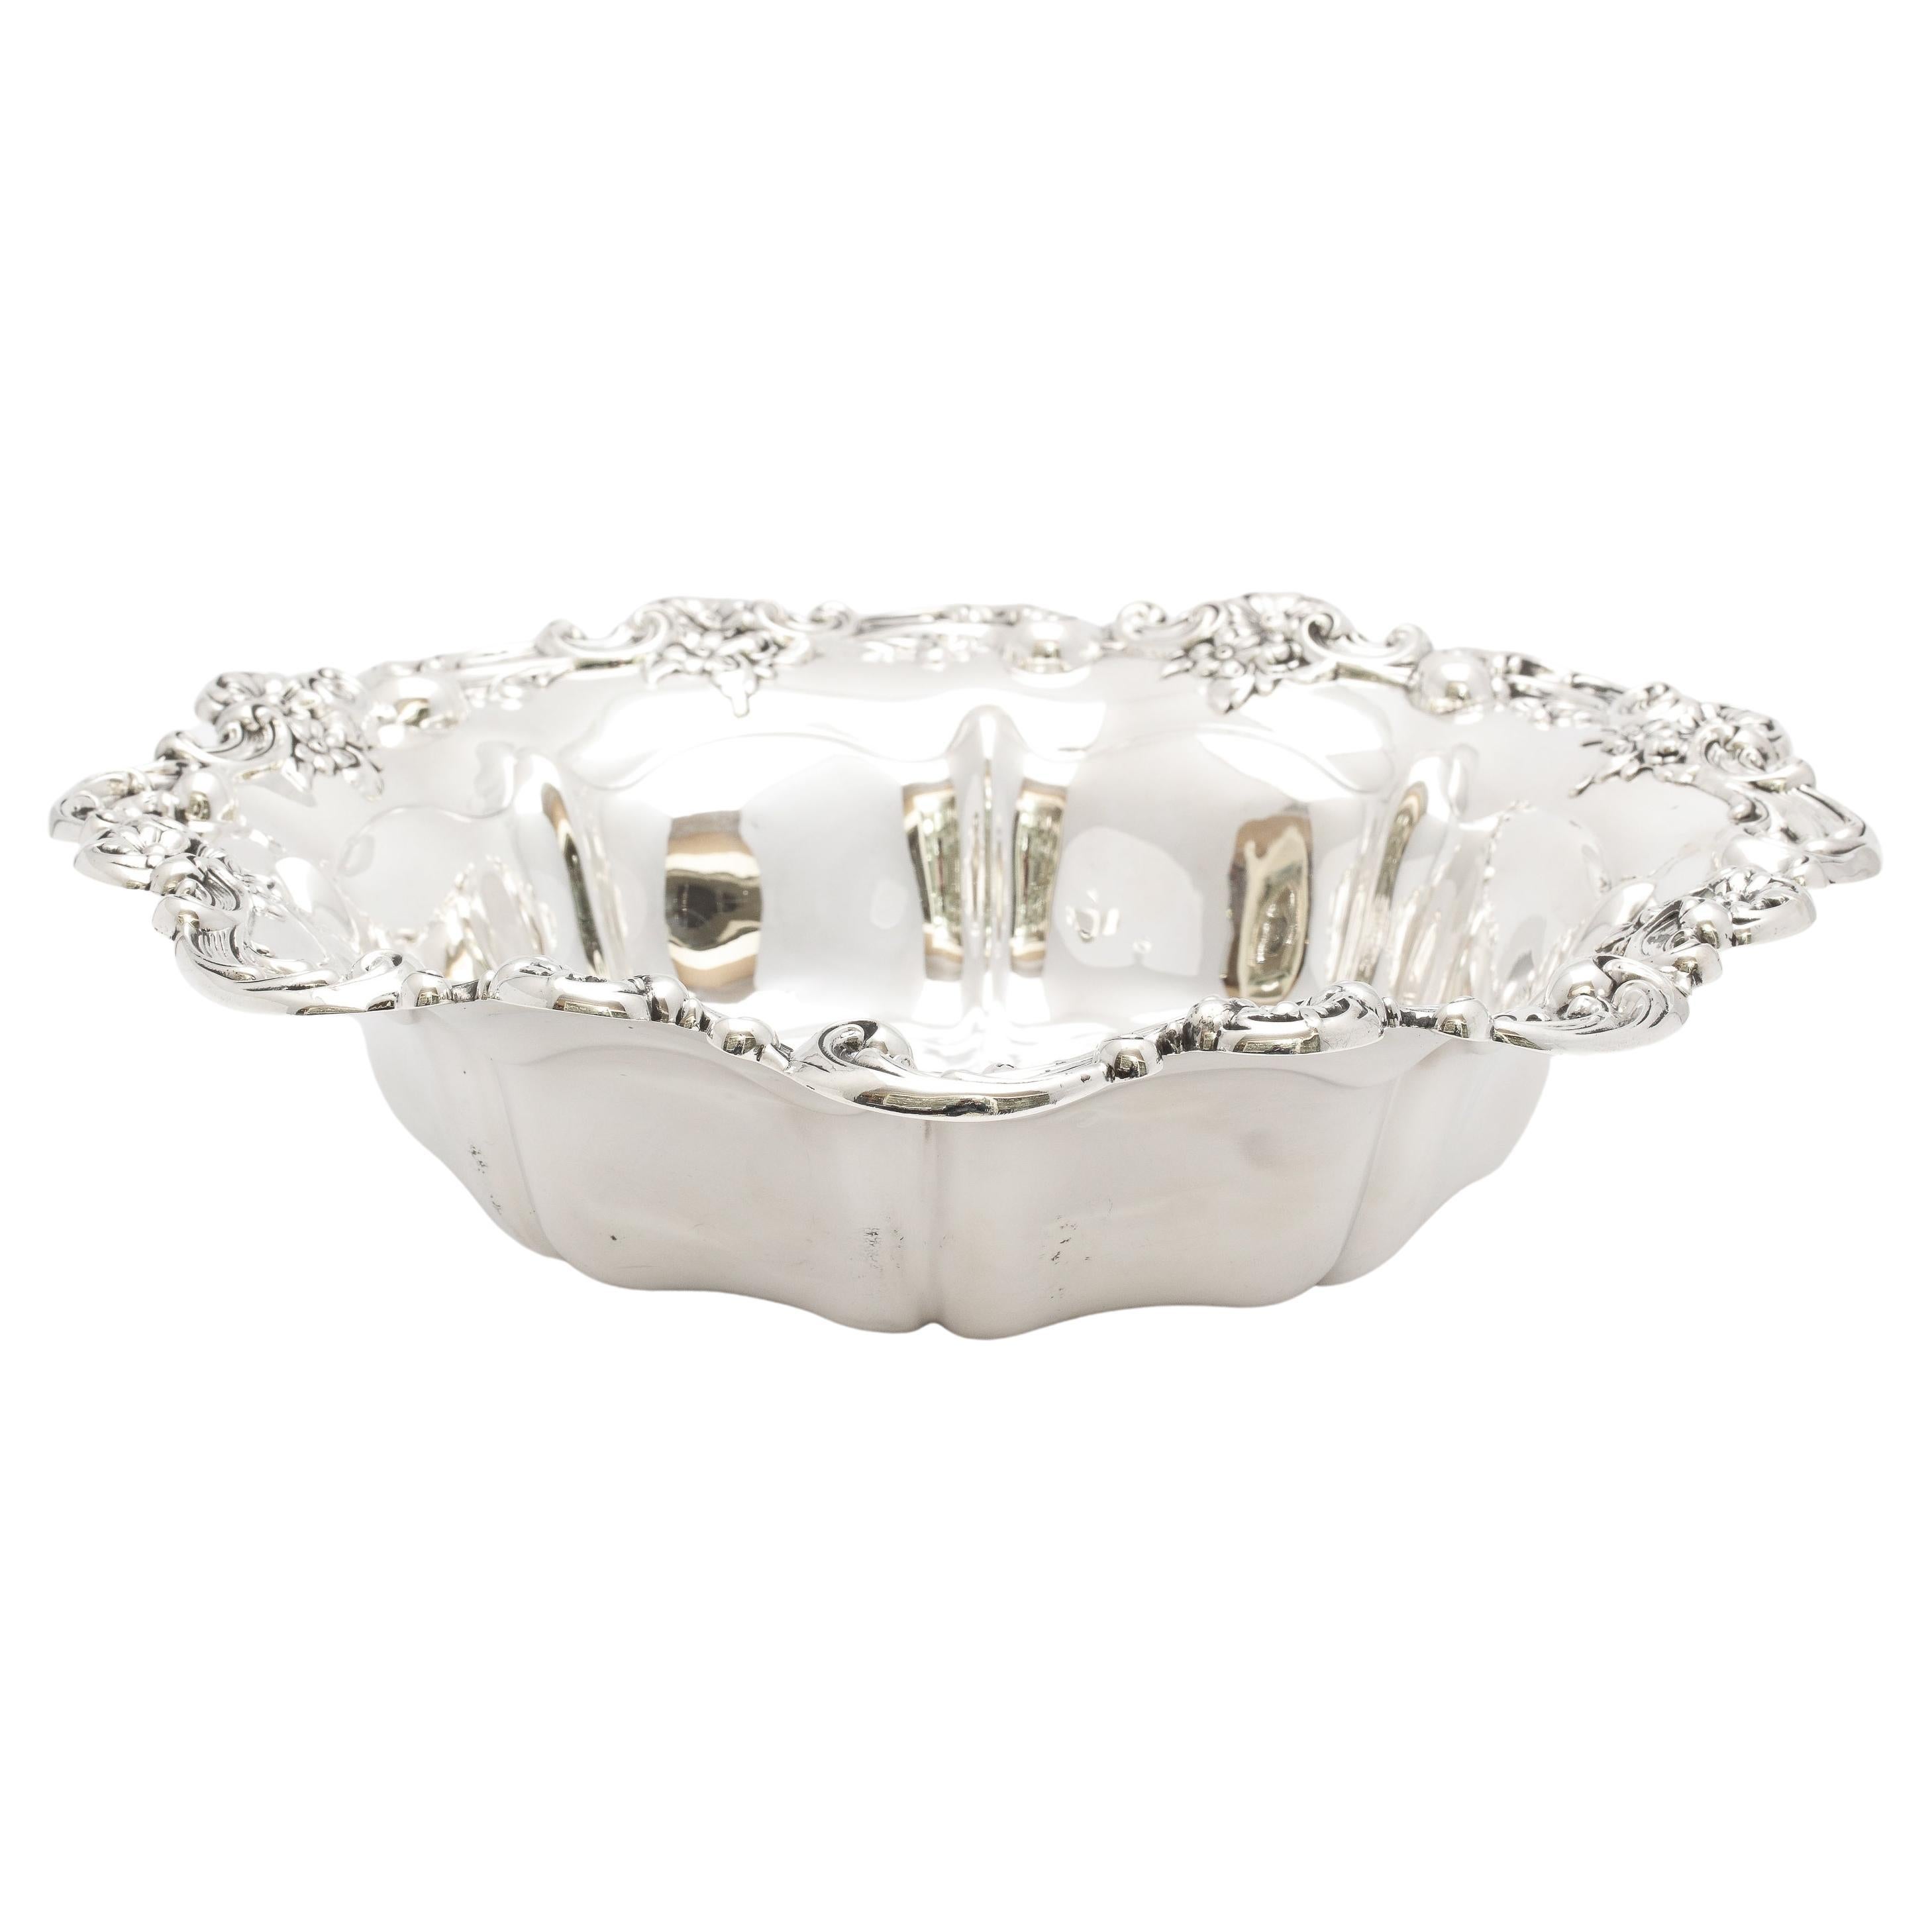 Beautiful Victorian-Style Sterling Silver Centerpiece Bowl By Gorham For Sale